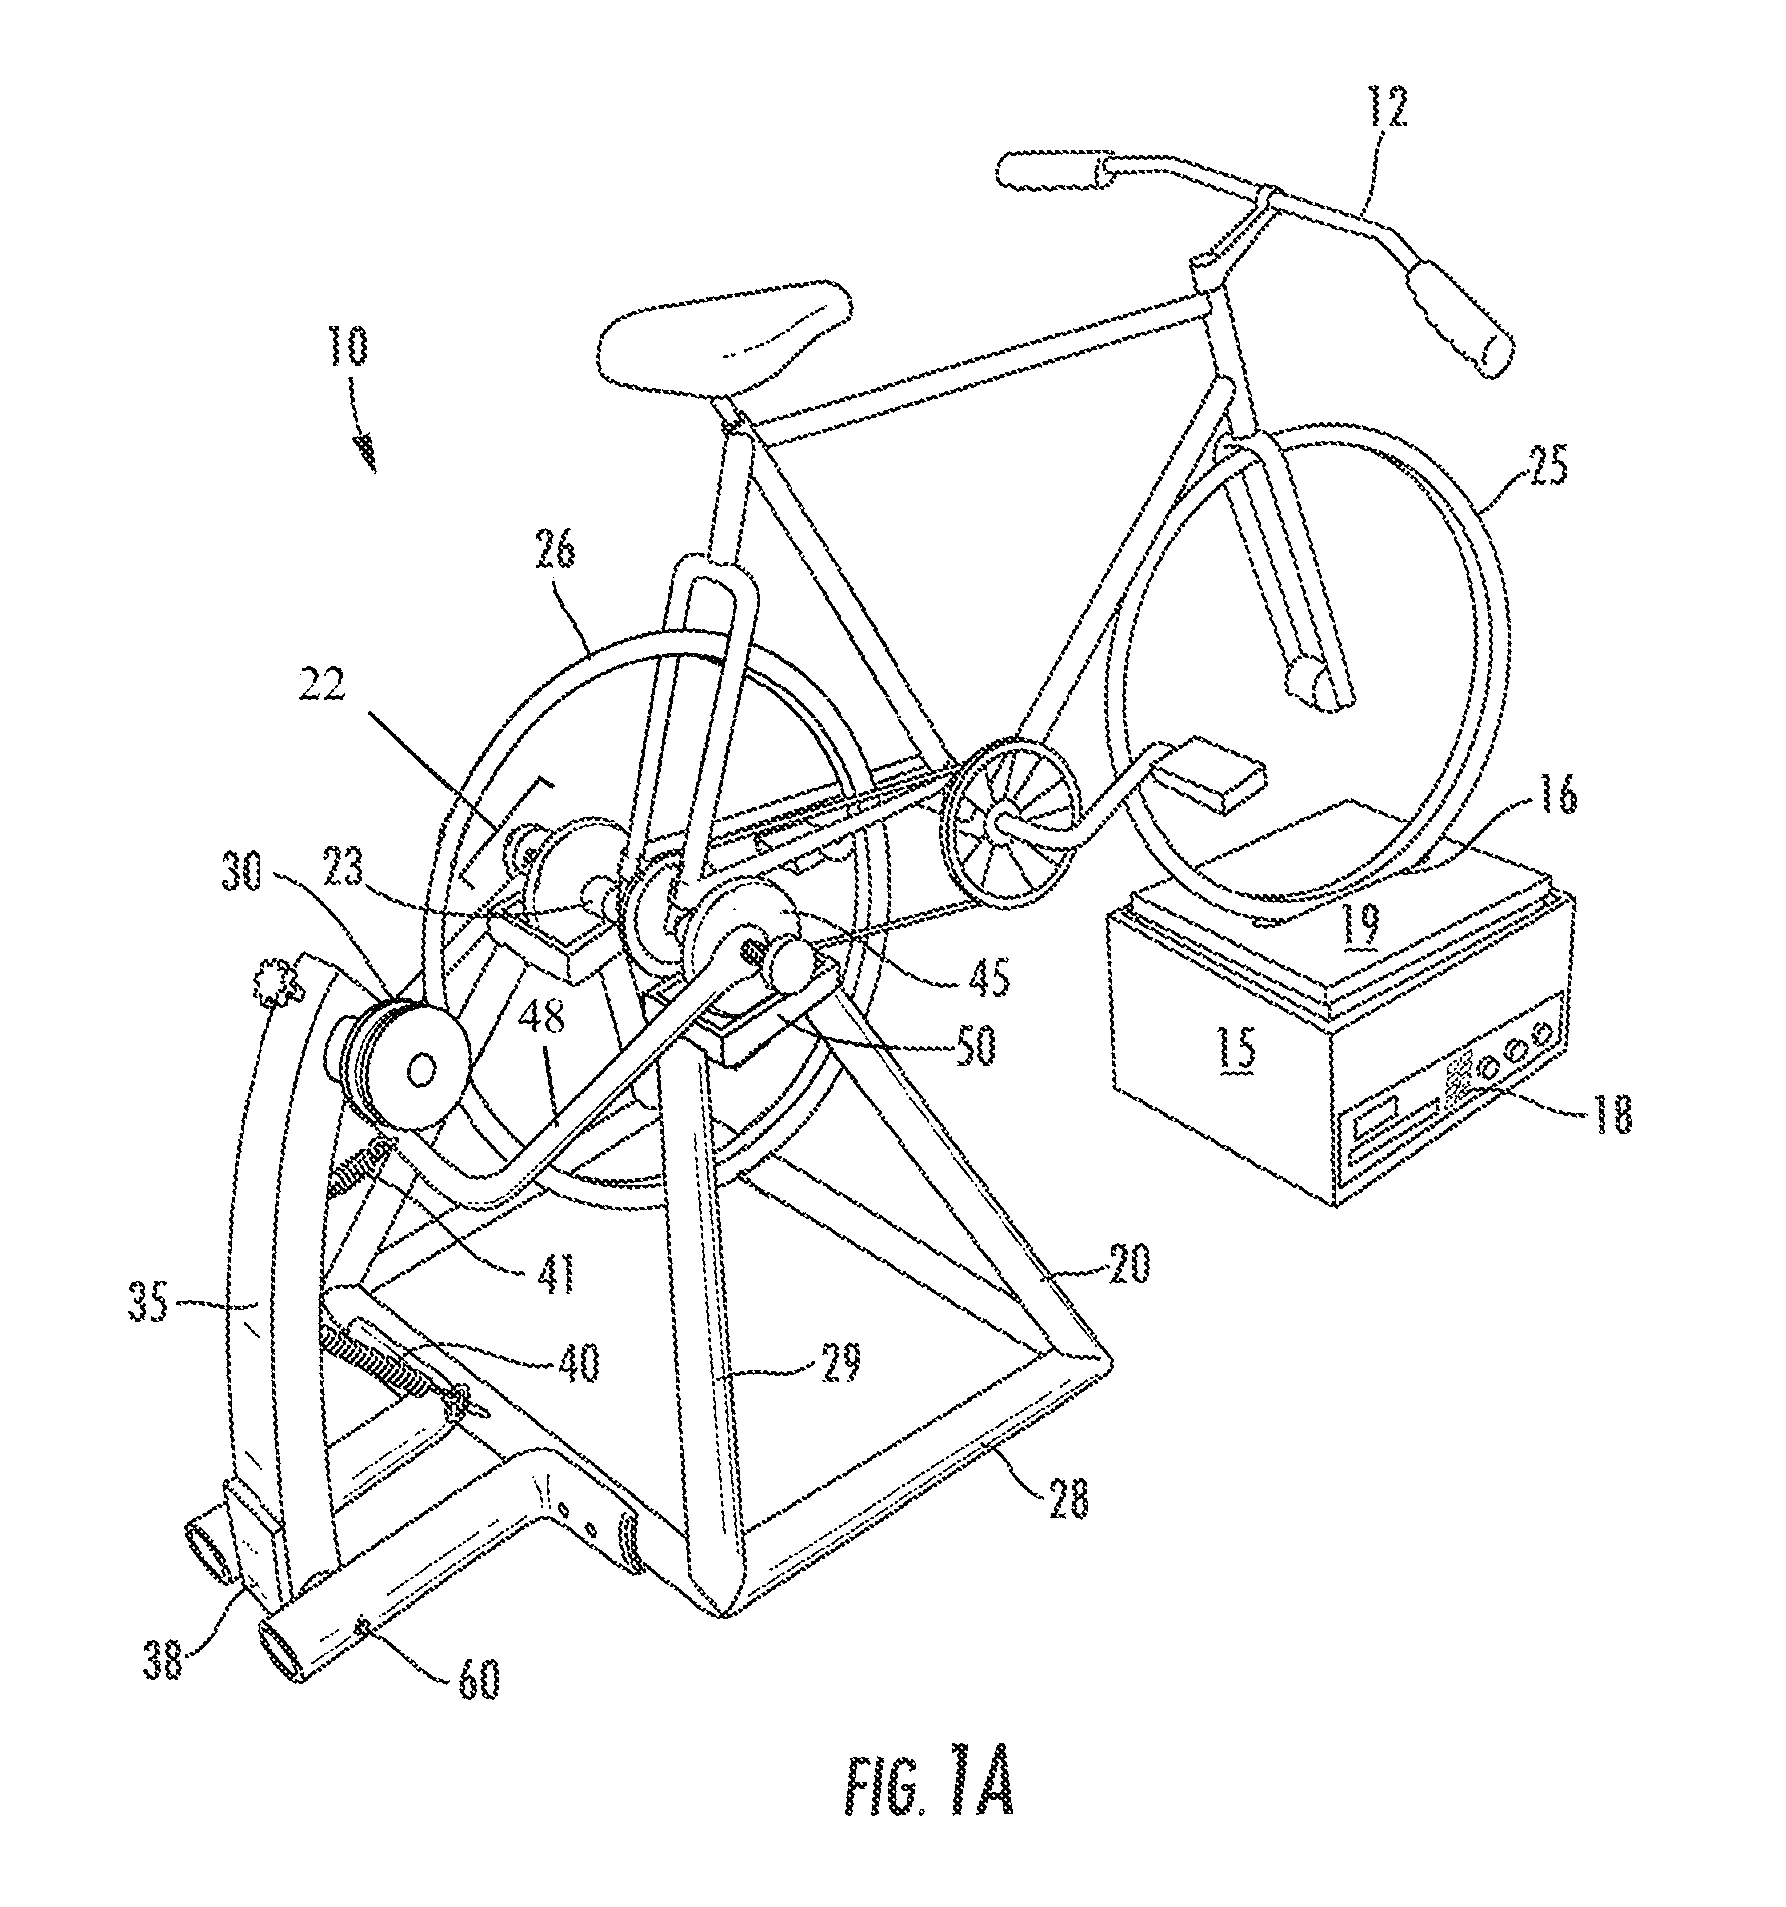 Bicycle trainer with variable resistance to pedaling